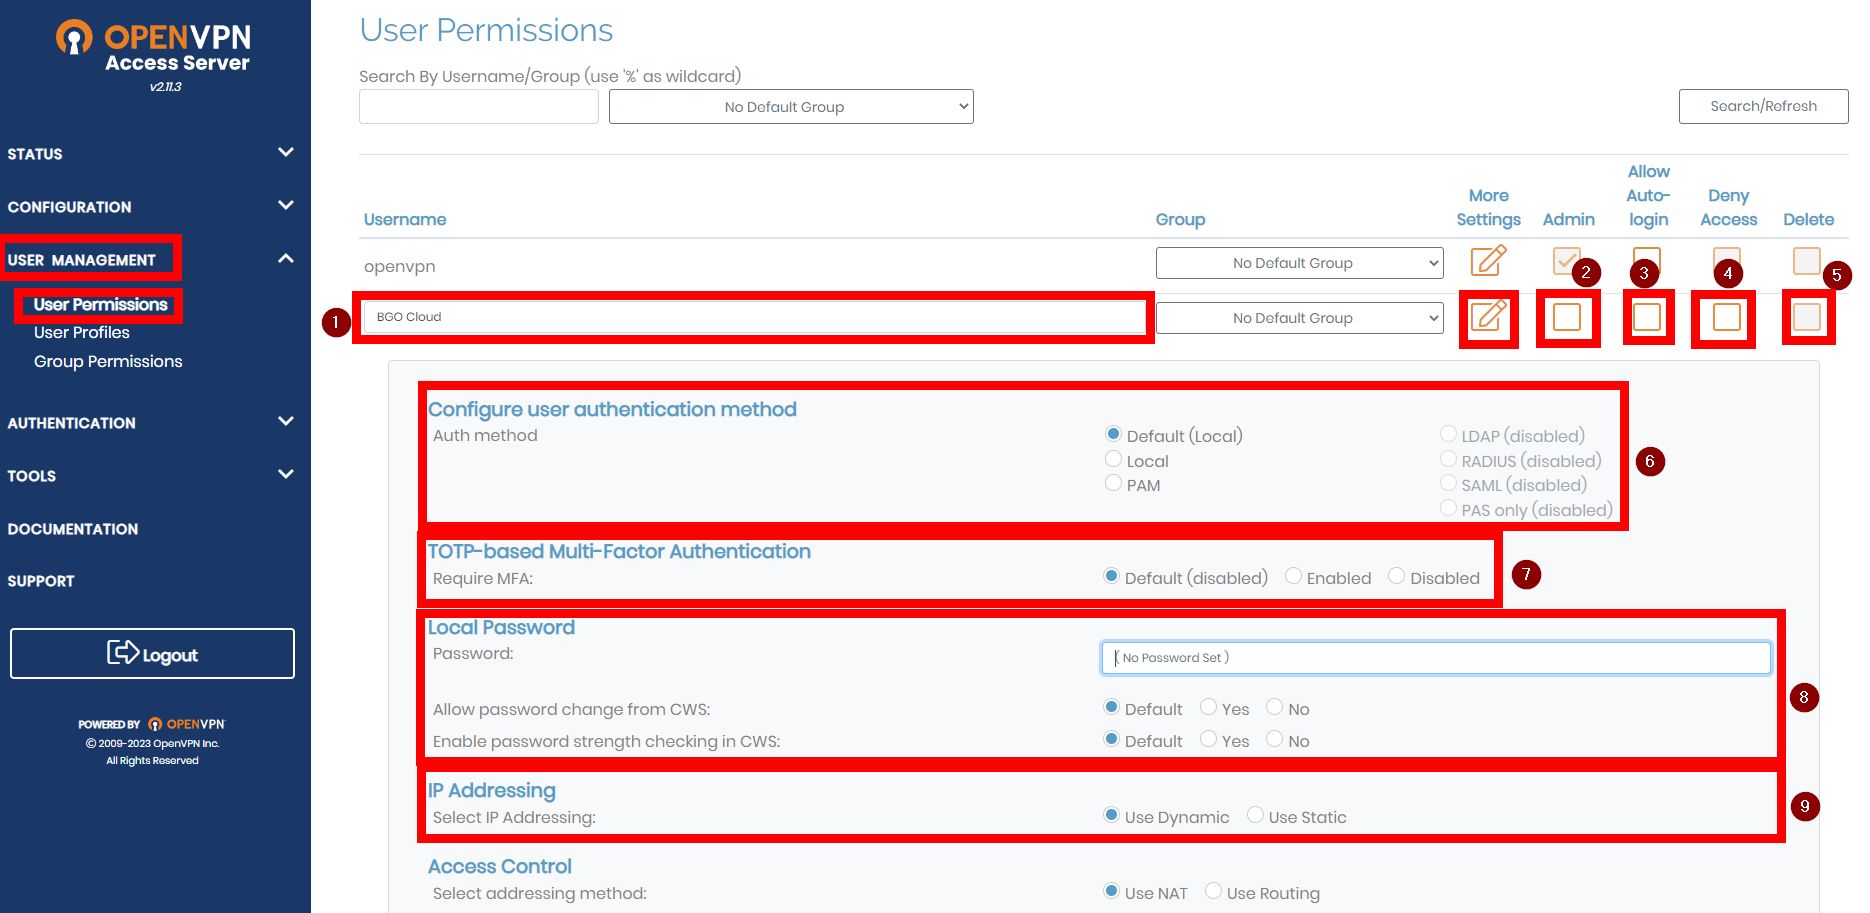 User Permissions panel overview